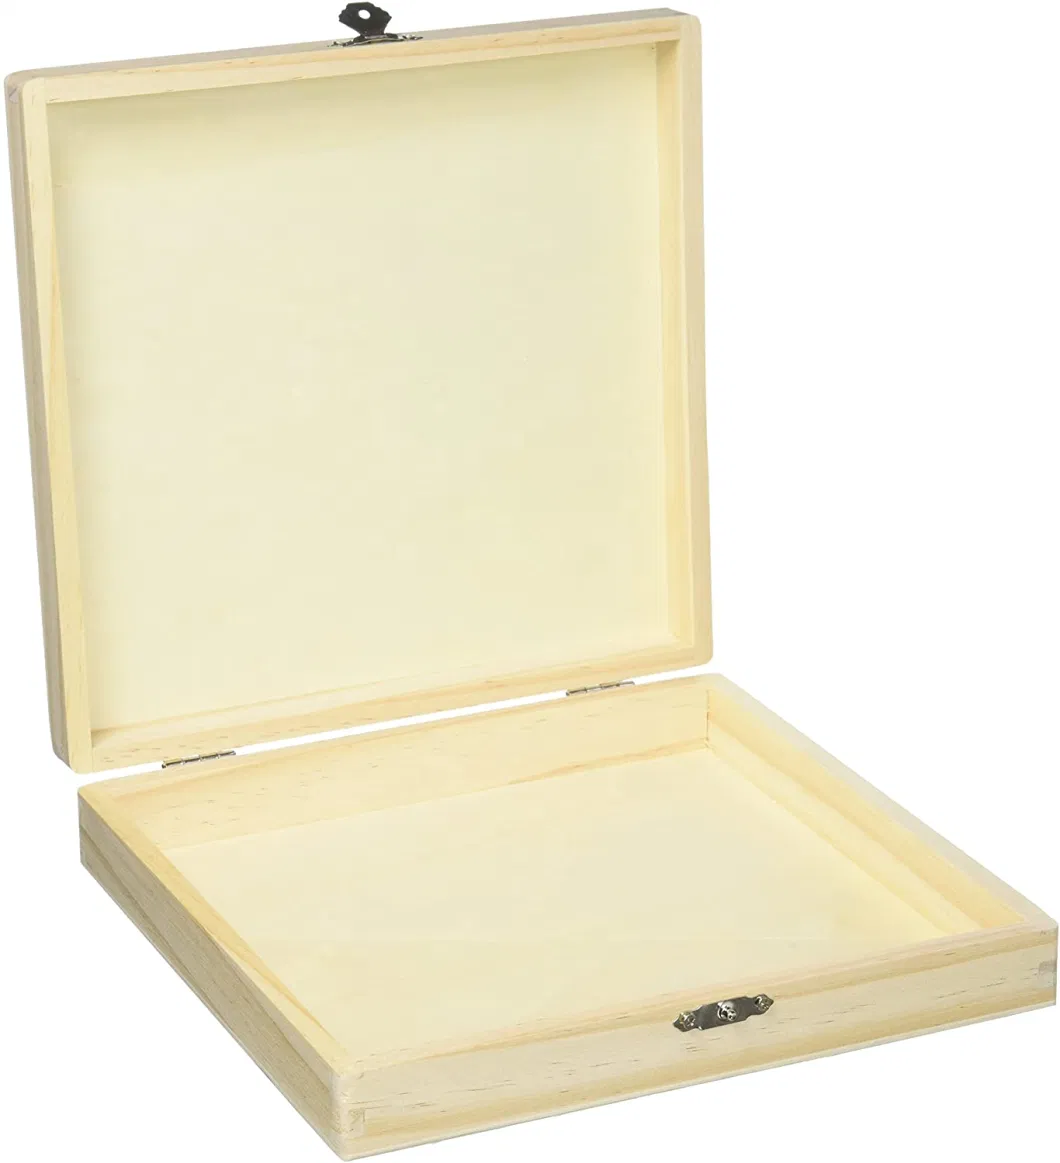 Factory Price Wooden/Wood Box with Hinged Lid for Cigar/Gift/Pen/Jewelry/Souvenir Package/Storage/Packing